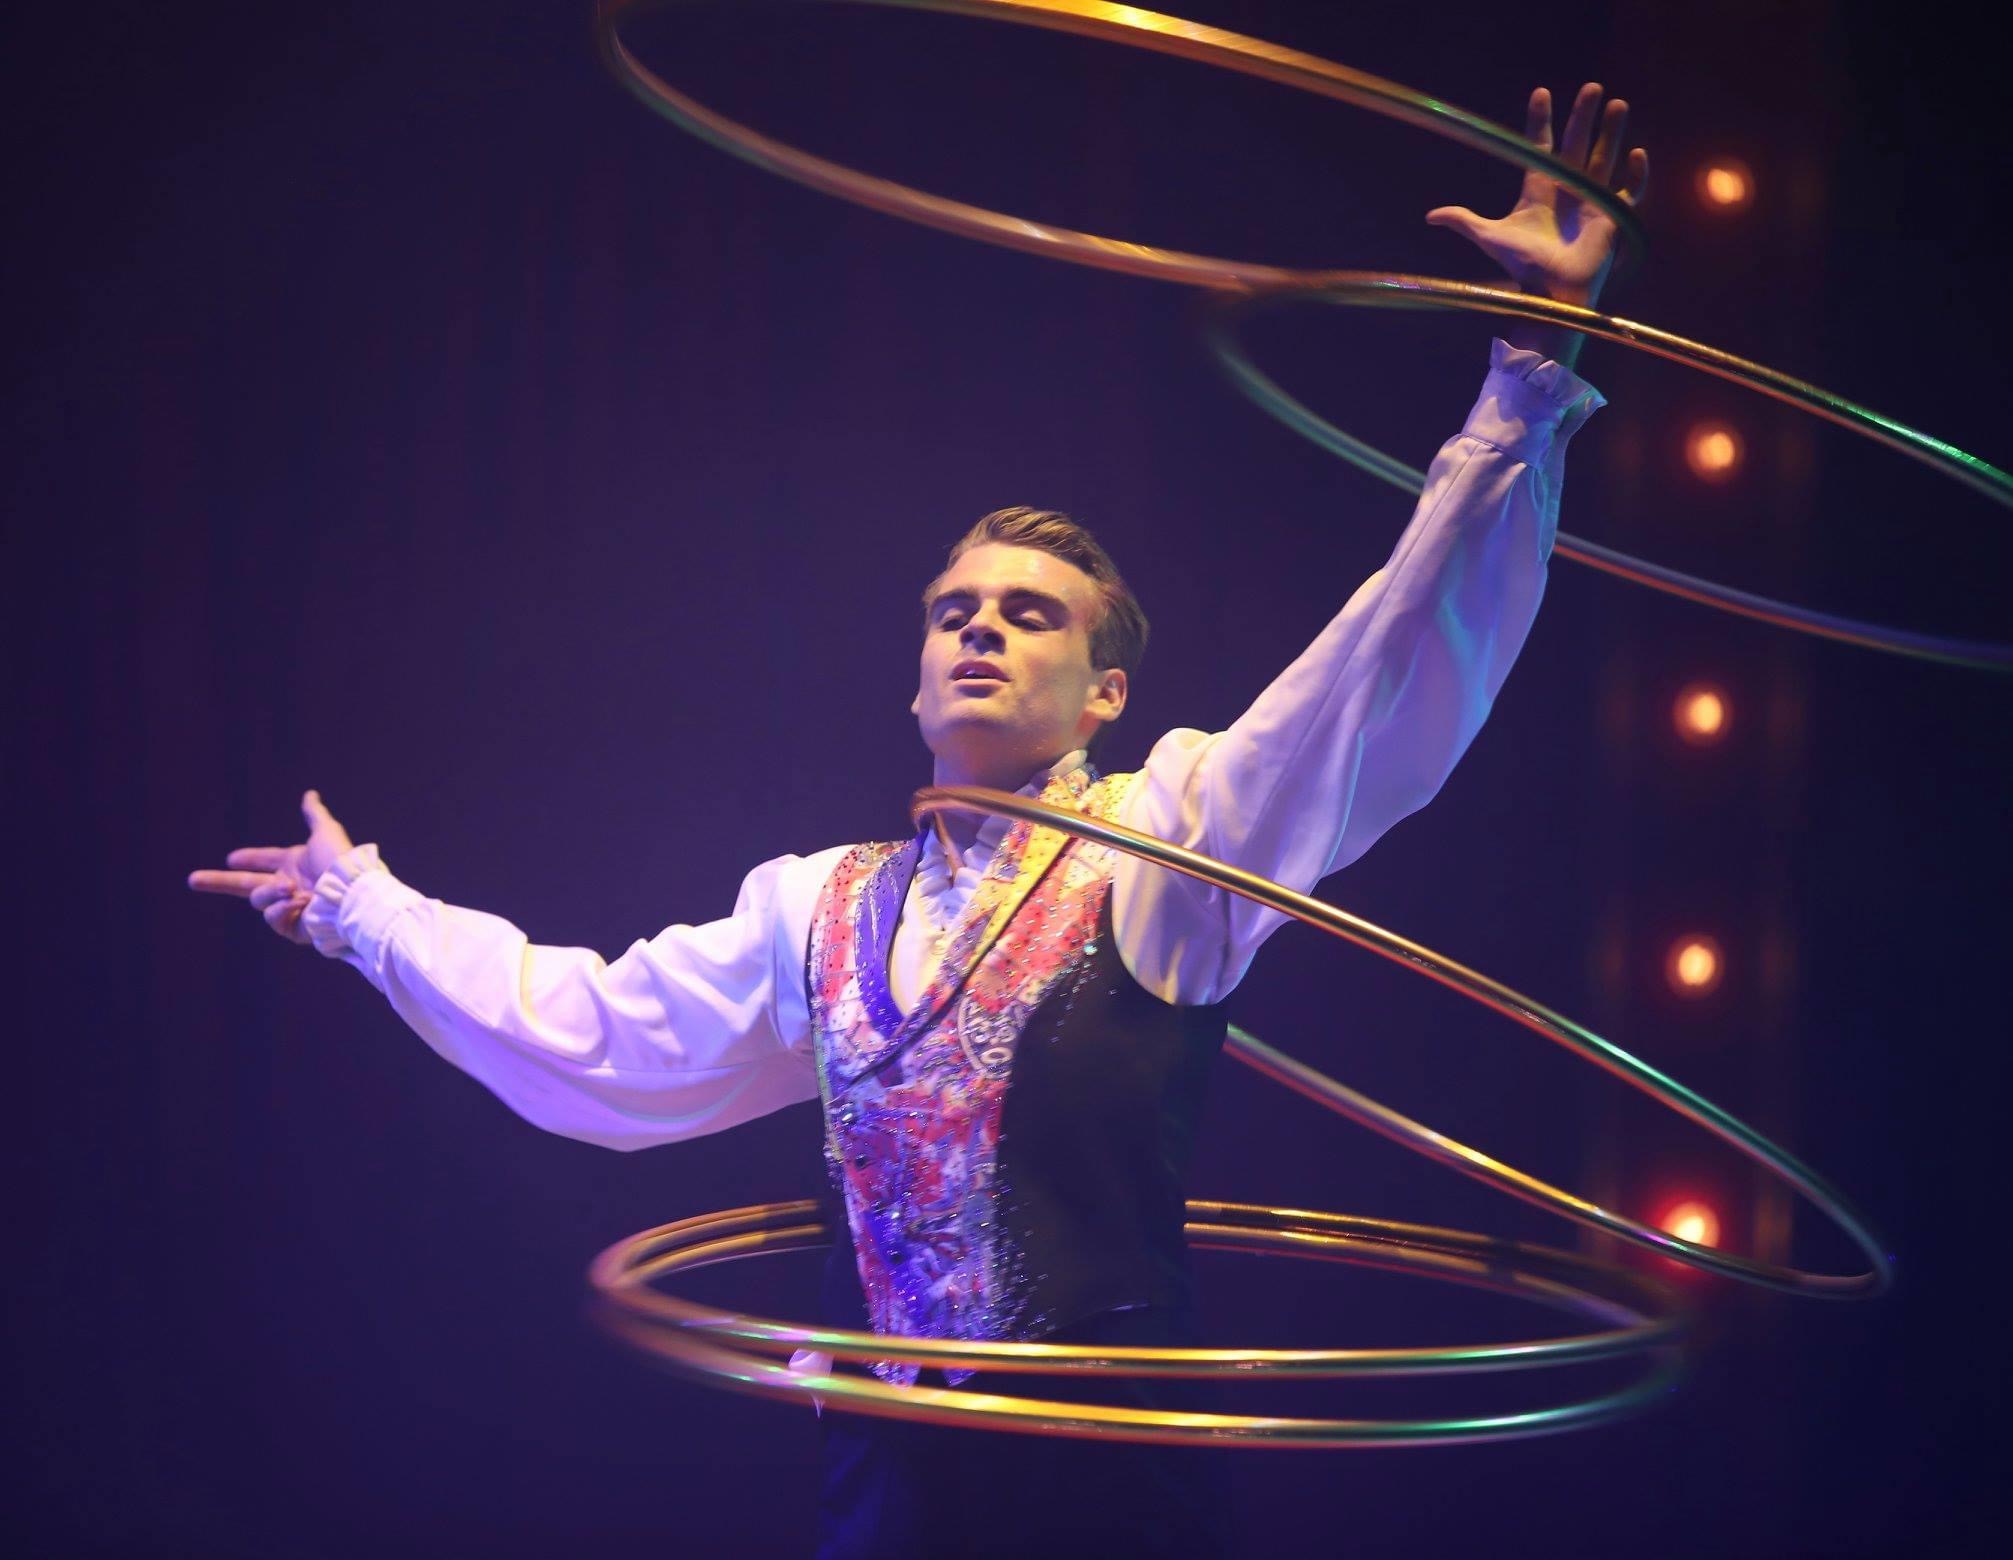 Performing his hula hoop act all around the world